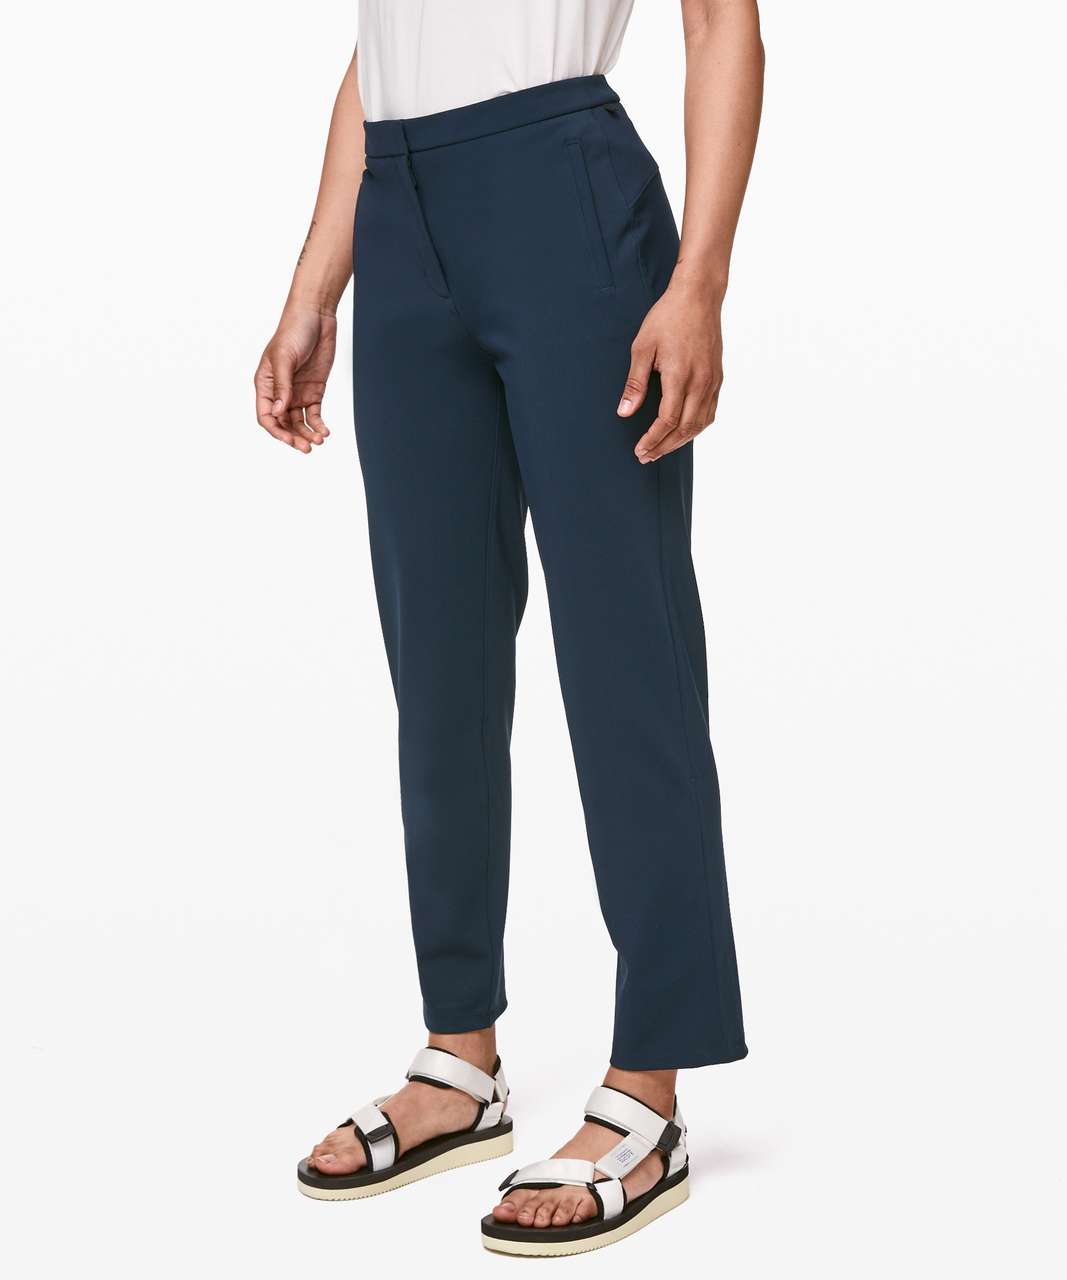 Lululemon On The Move Pant Discontinued Dr